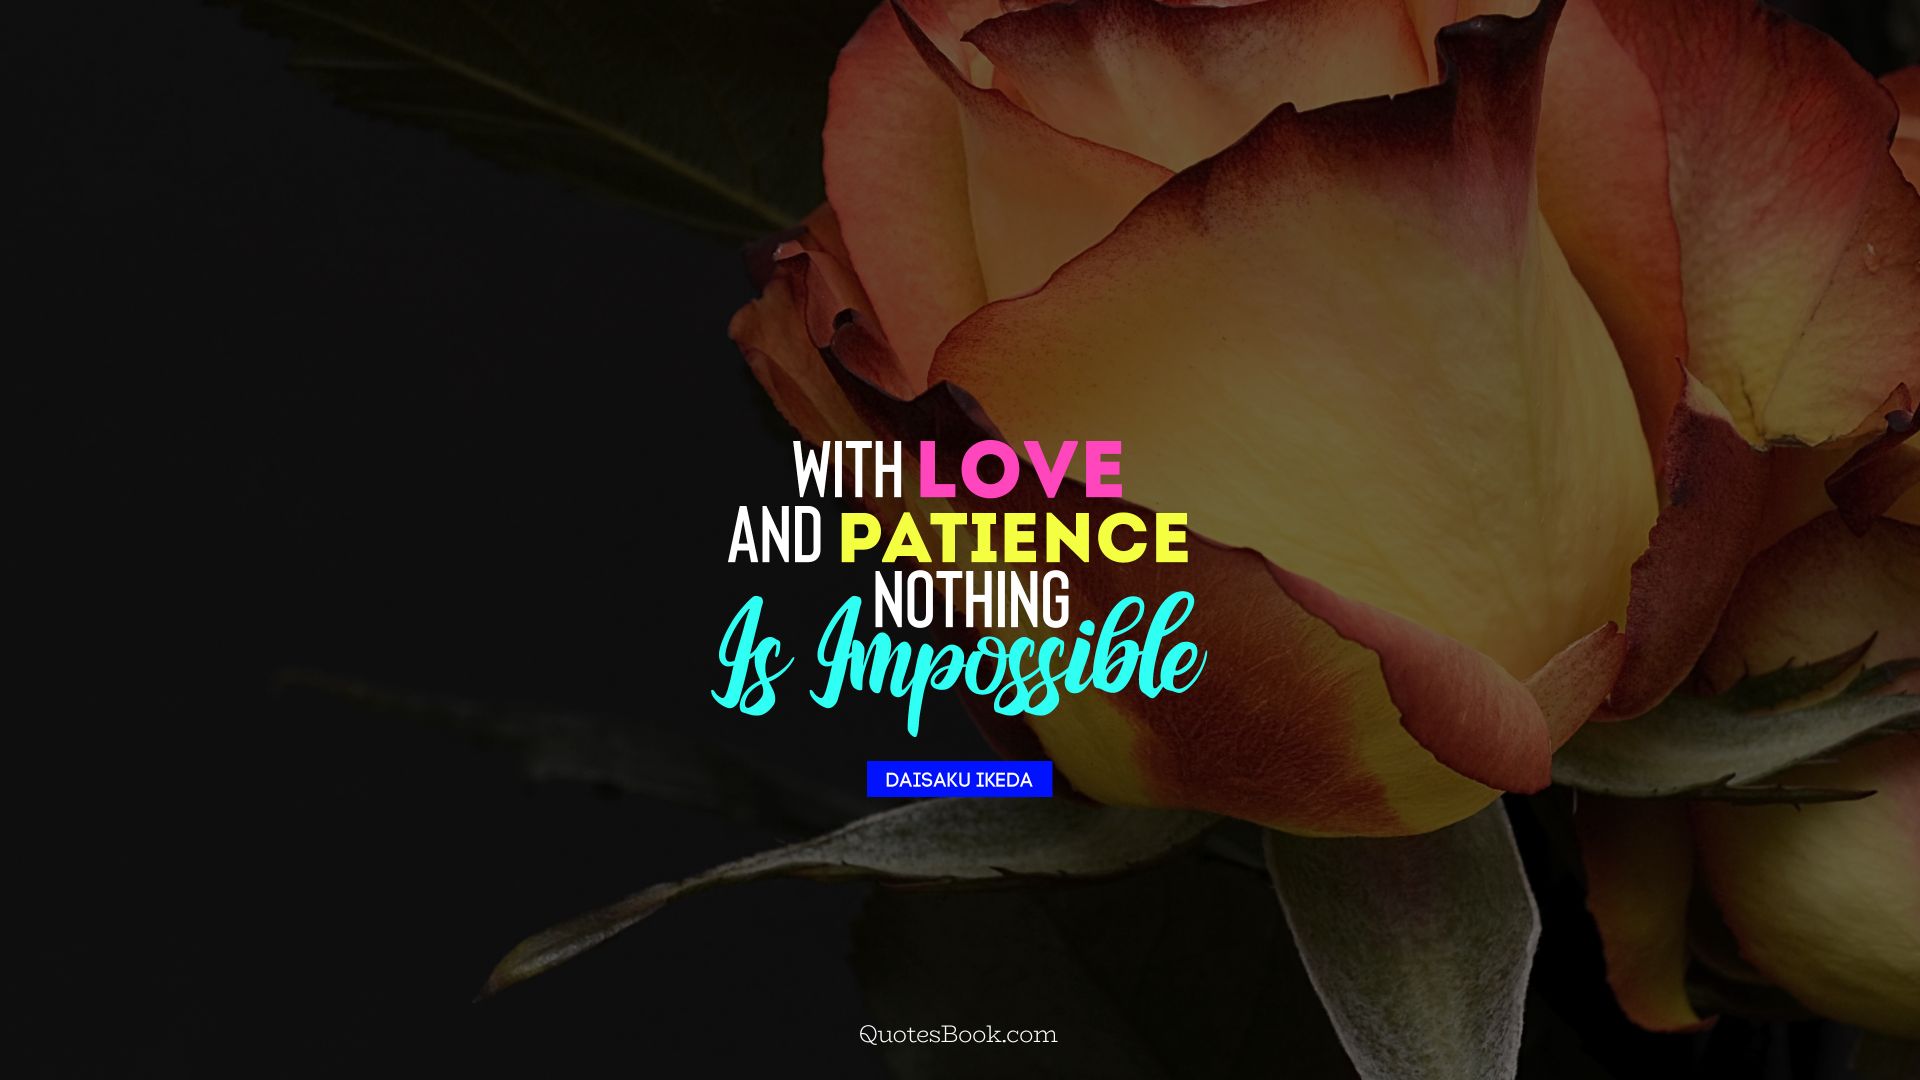 With love and patience nothing is imposible. - Quote by Daisaku Ikeda